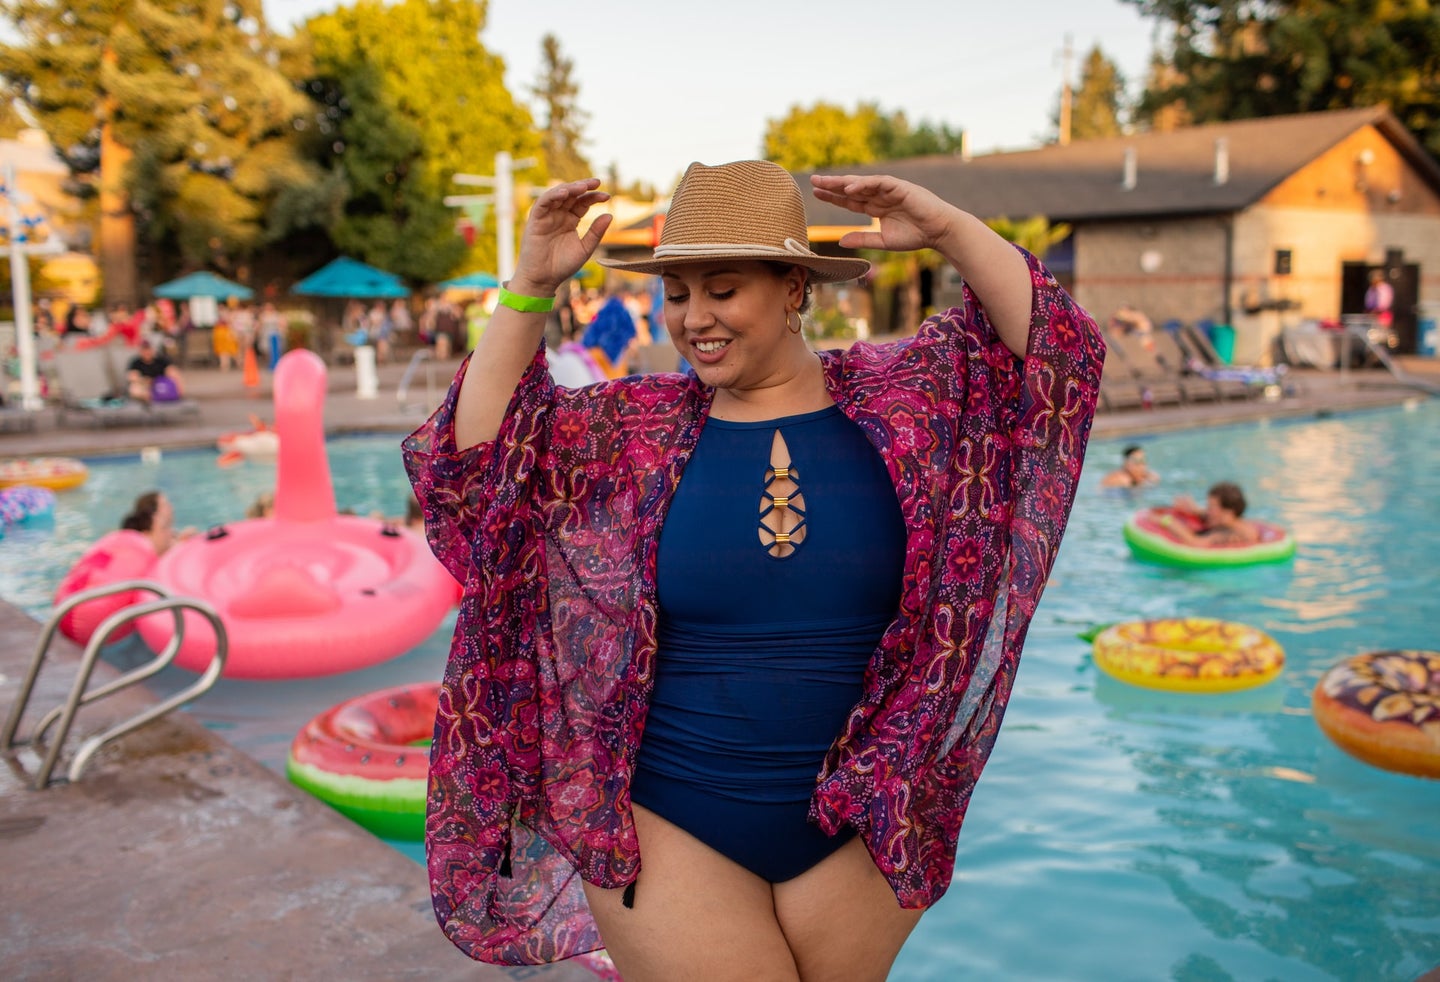 Person in blue one-piece bathing suit, sun hat, and pink kimono at pool